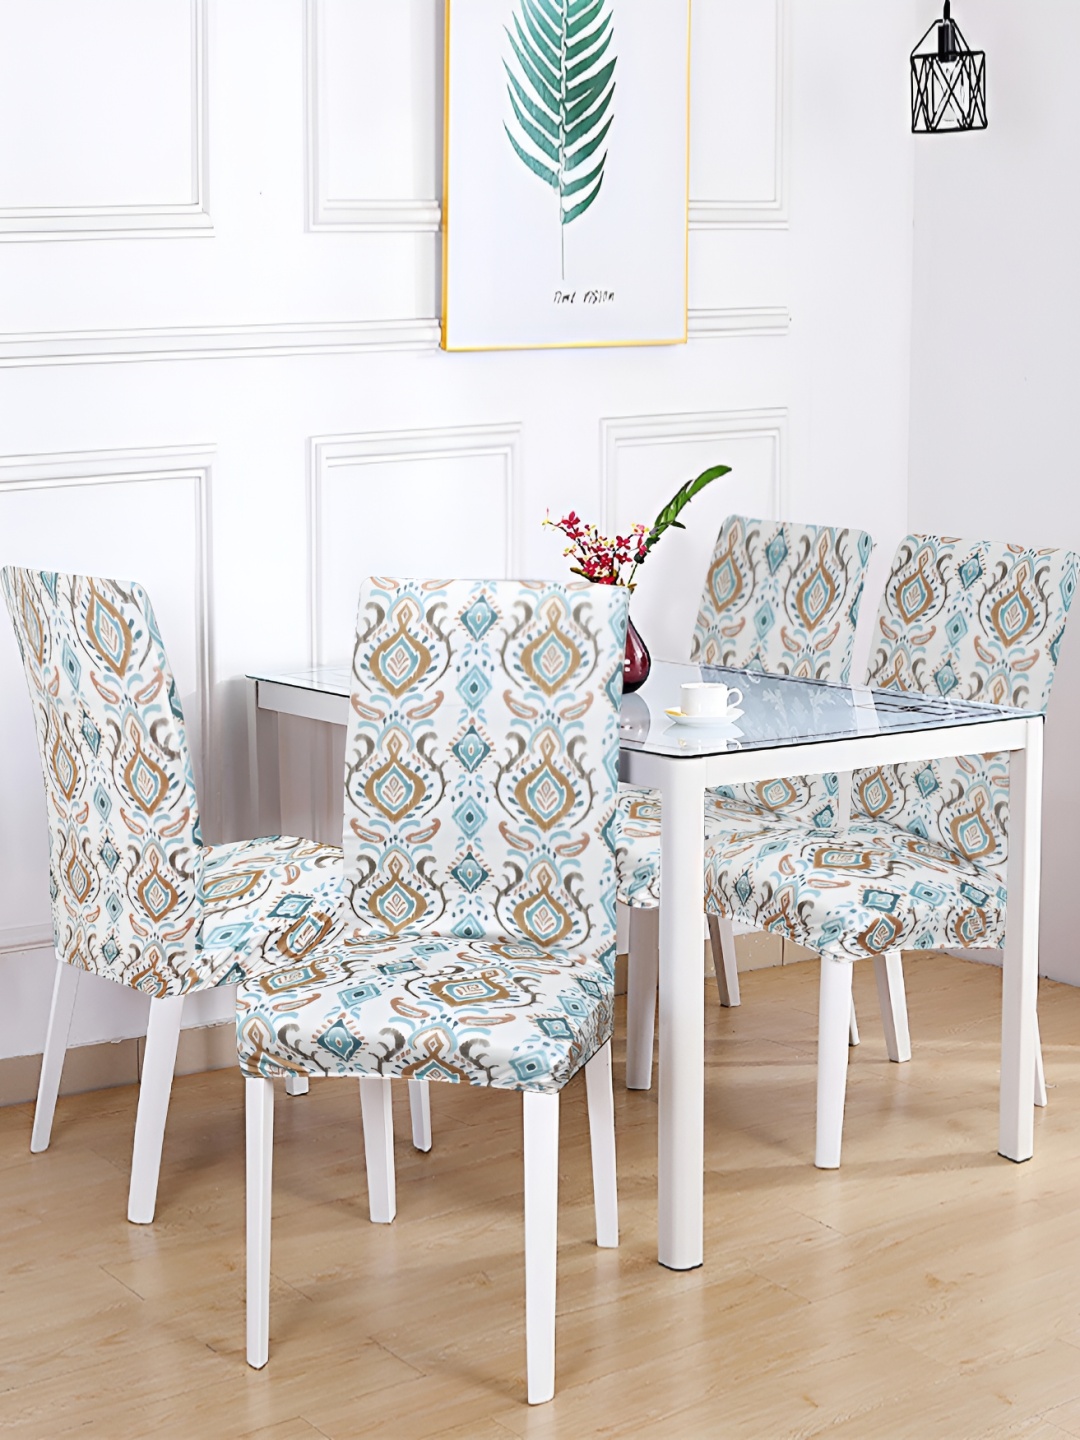 

hargunz White & Blue 4 Pieces Floral Printed Breathable Chair Covers